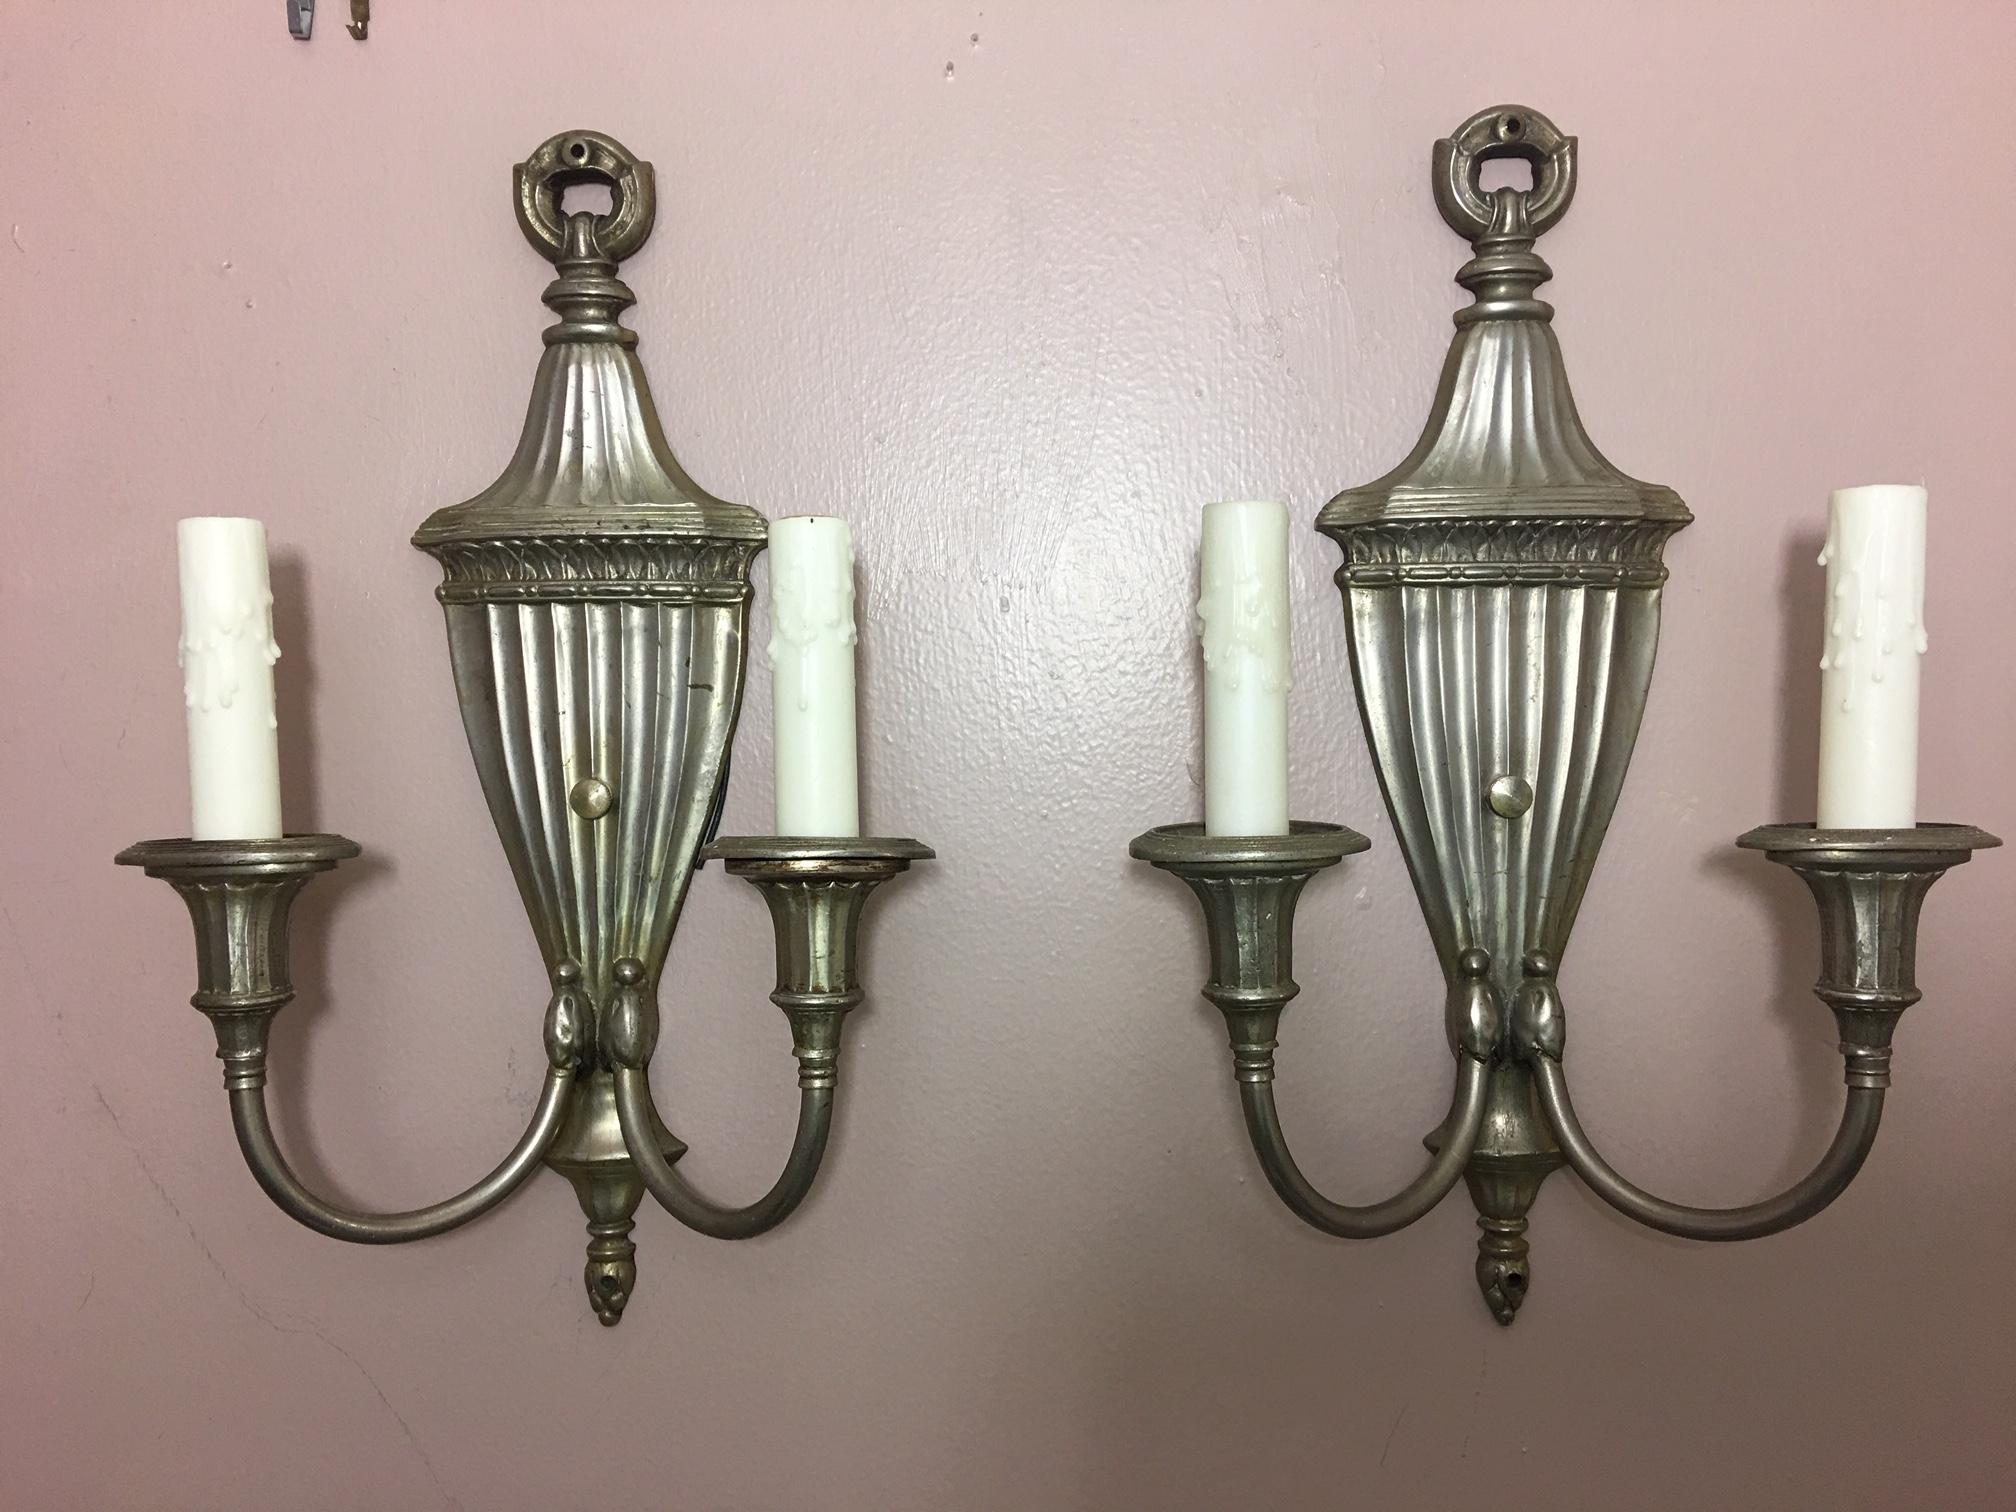 Pair of silver two-light urn sconces, mid-20th century.